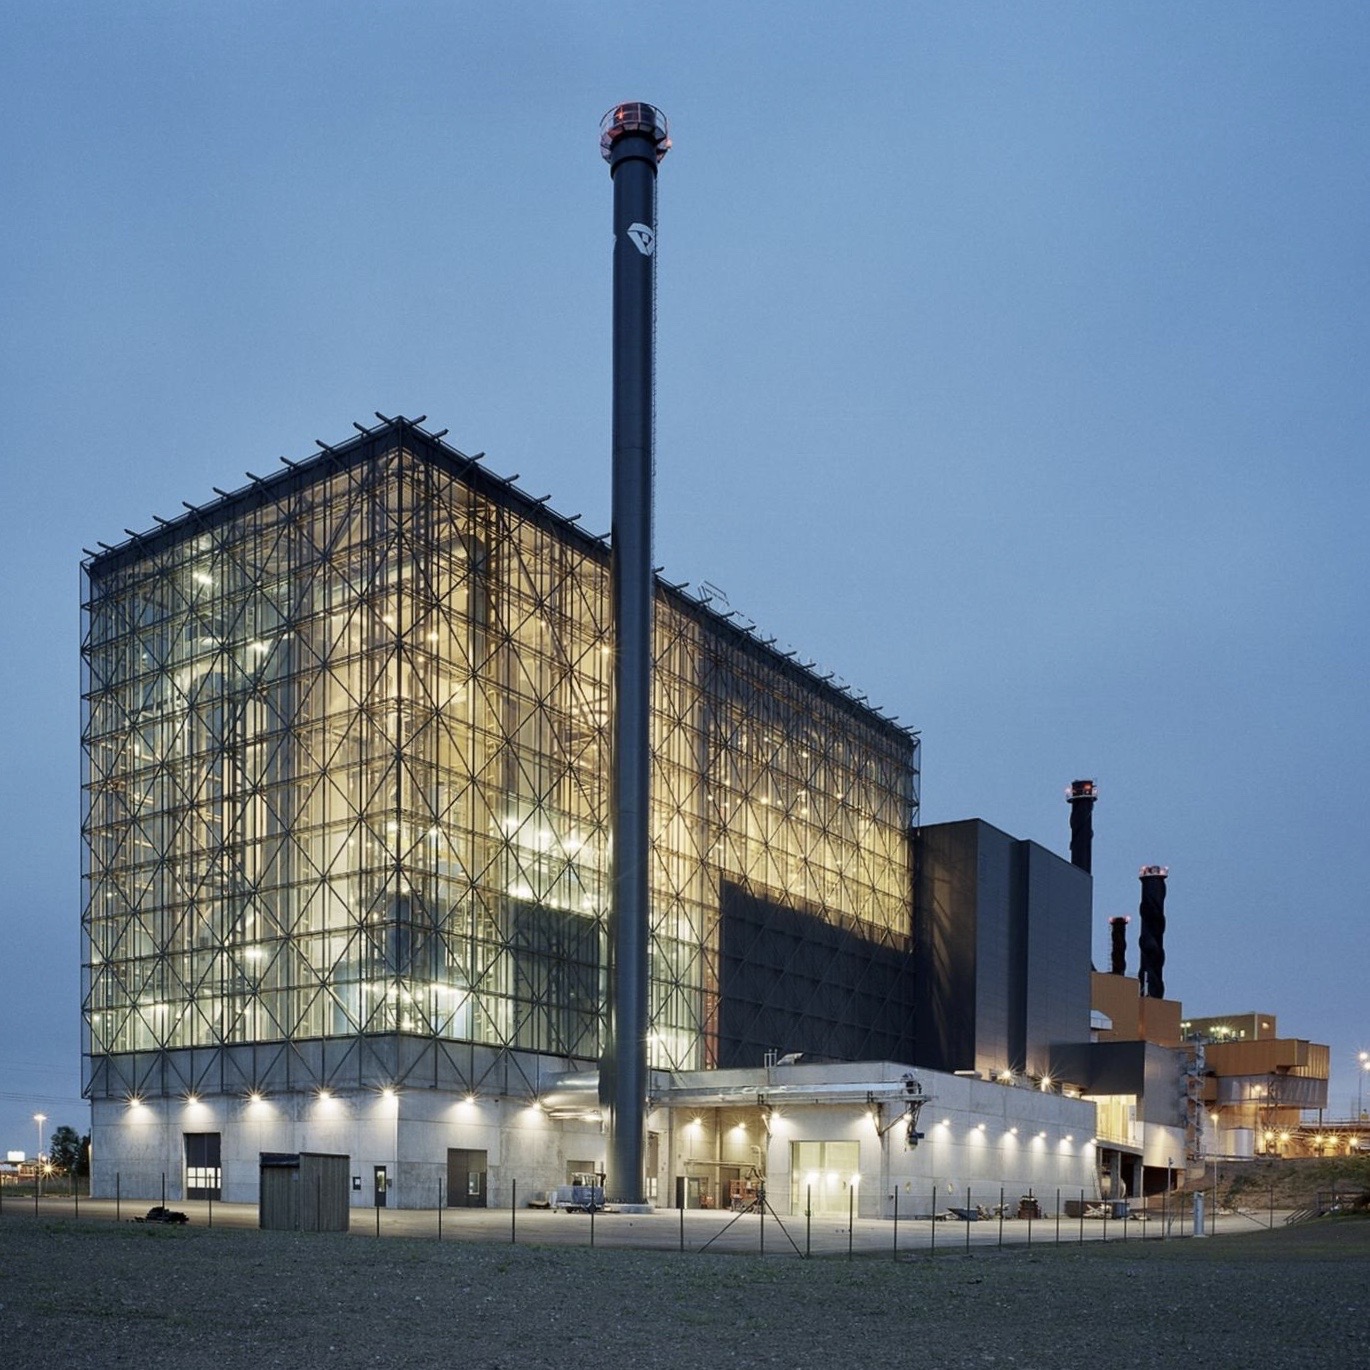 Waste recycling plant in Malmö